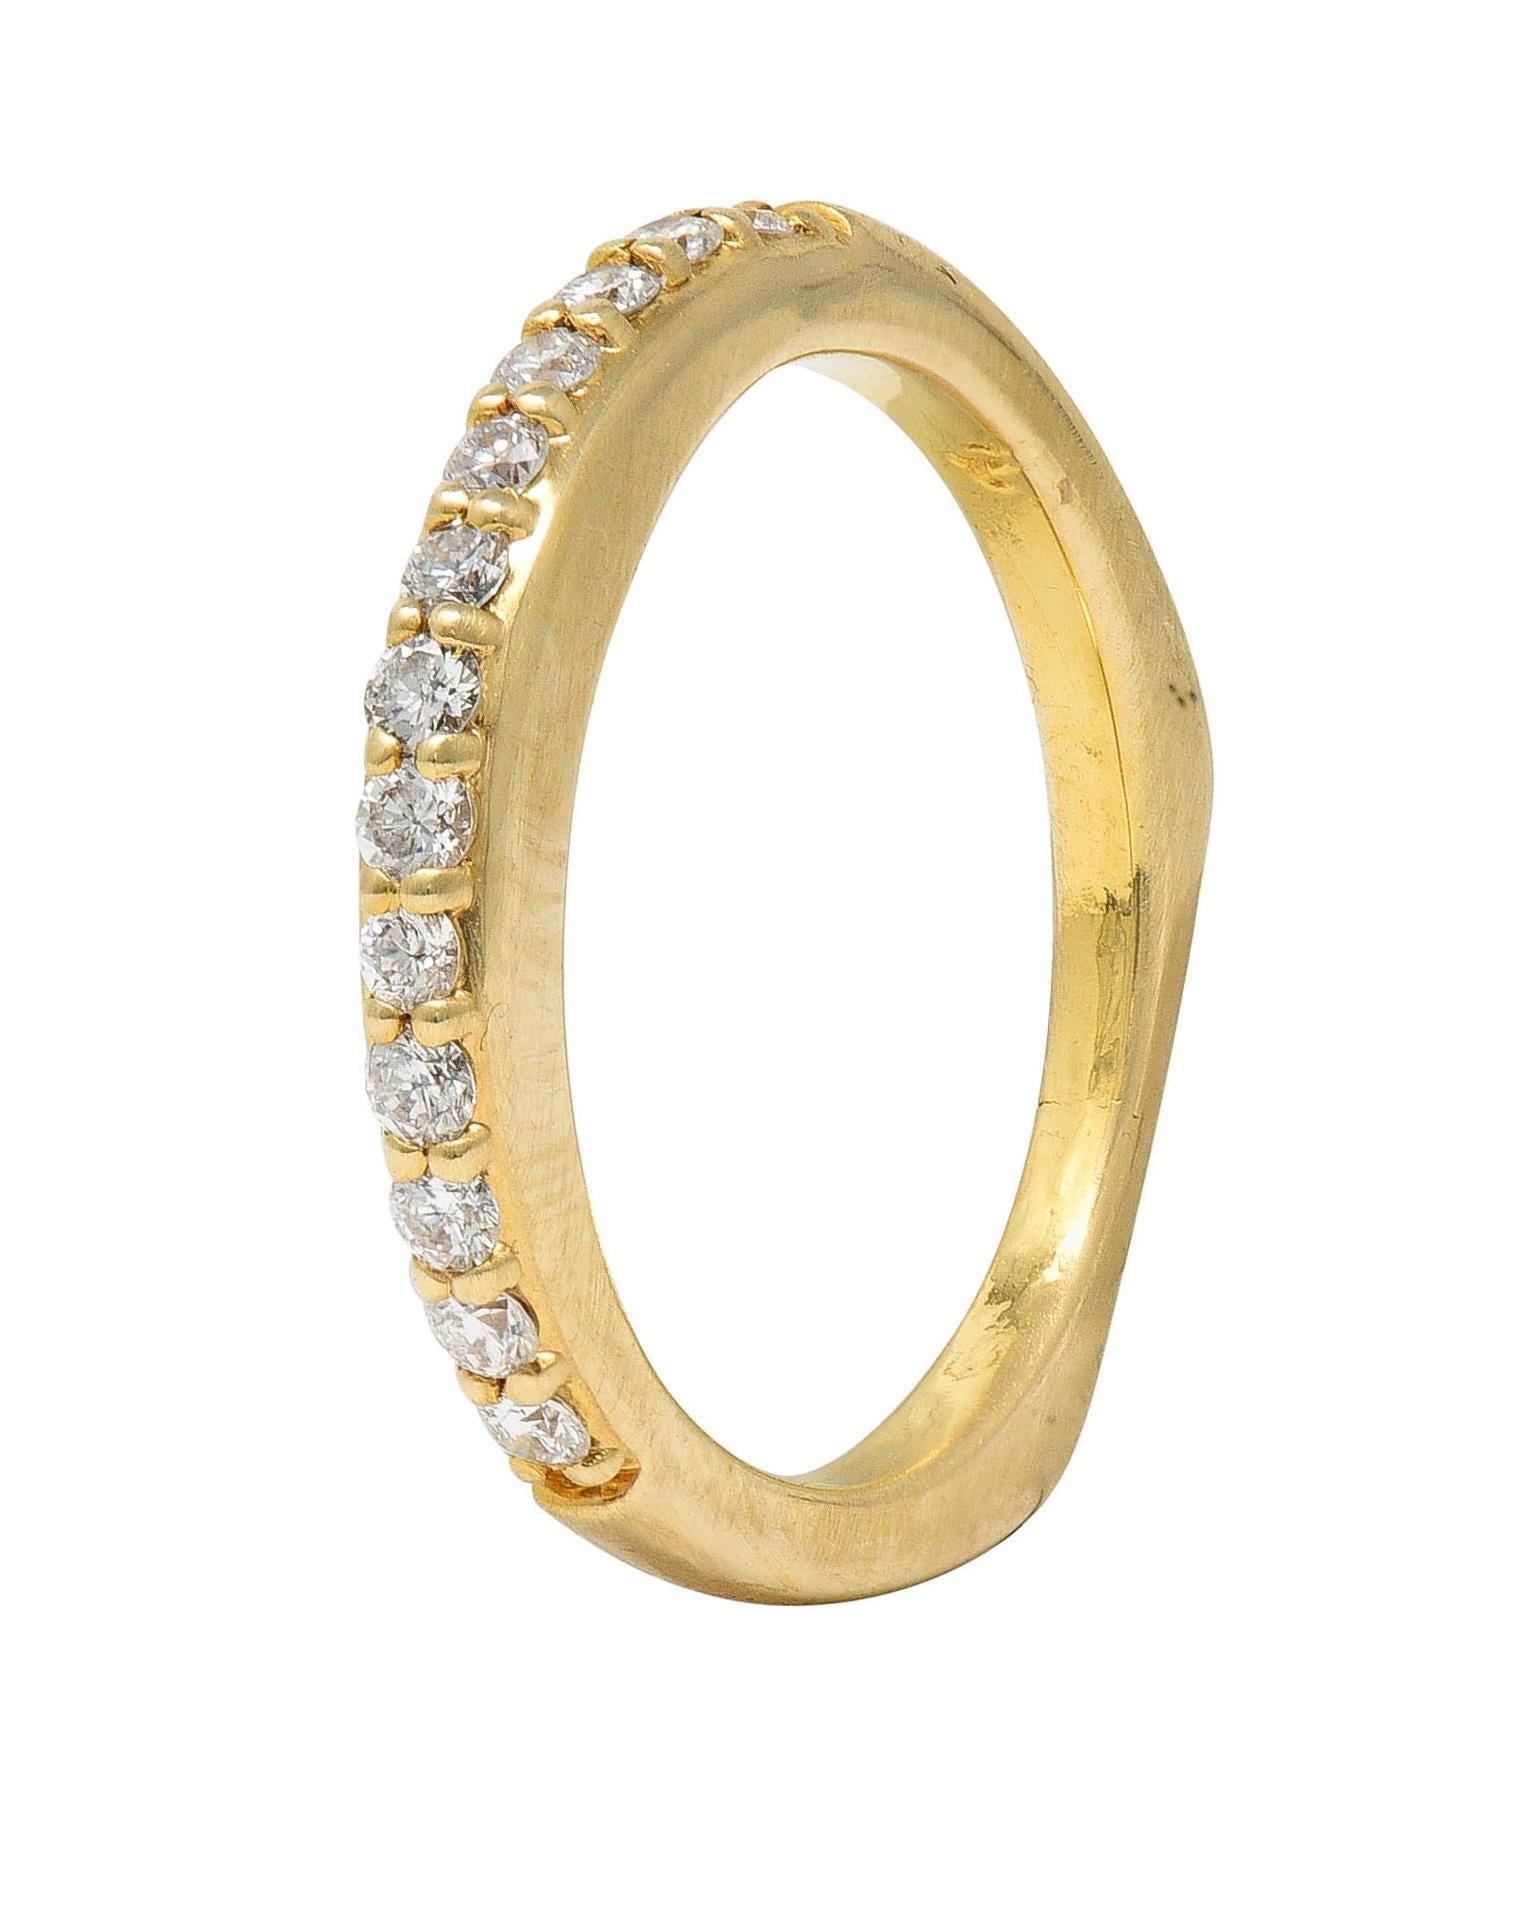 Featuring a row of round brilliant cut diamonds prong set to front
Weighing approximately 0.26 carat total 
G color with VS2 clarity
Completed by squared off shank
Stamped for 14 karat gold
With partial maker's mark
Circa: 2000s
Ring size: 5 1/4 and